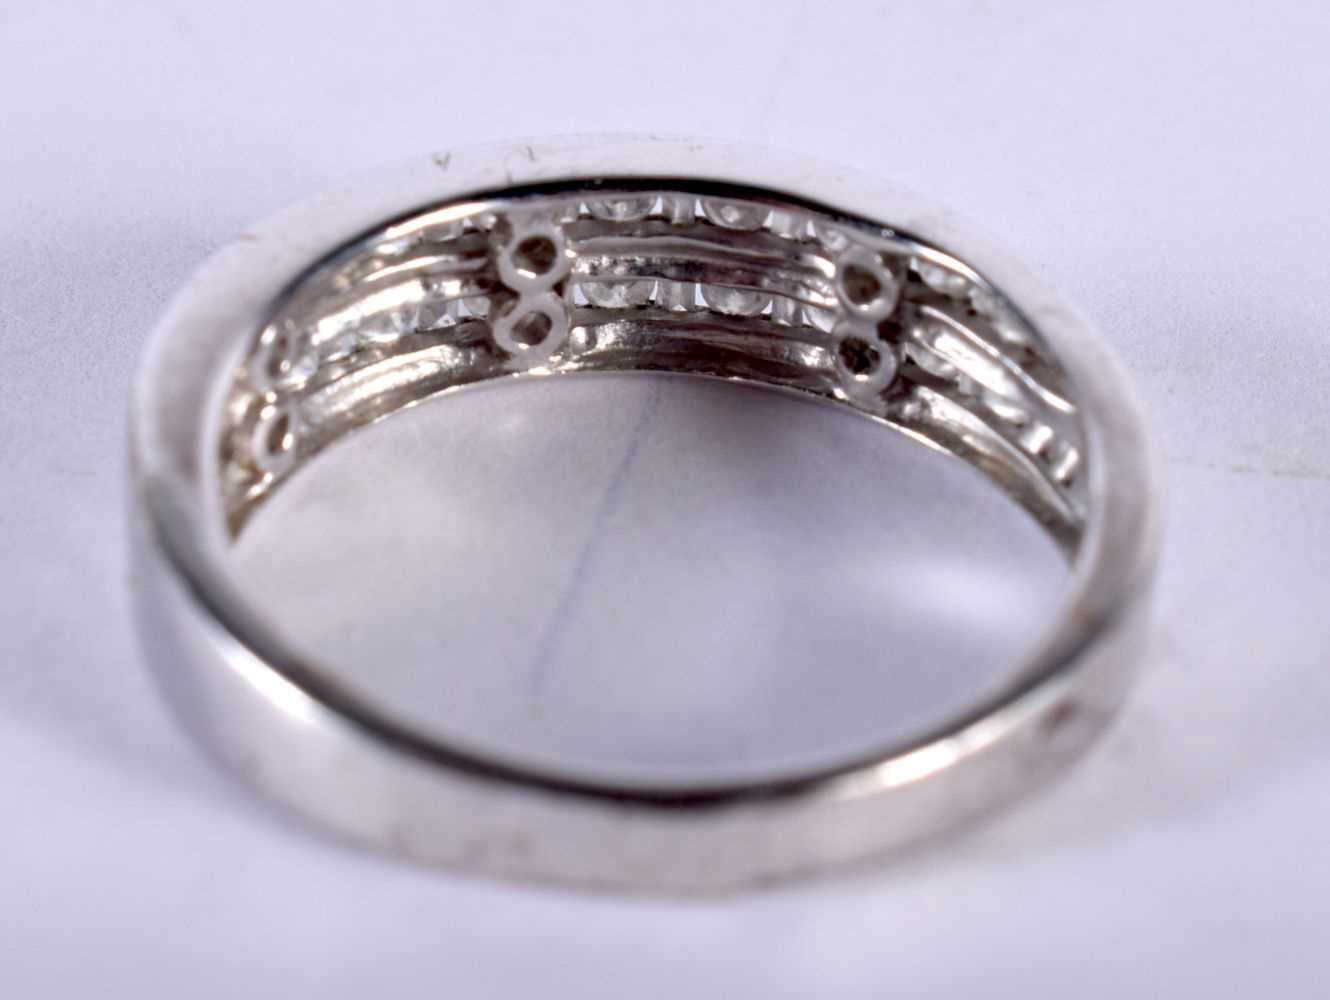 9ct White Gold Diamond Multi-Row Half Eternity Ring. Size O, weight 2.5g. Good Condition - Image 3 of 4